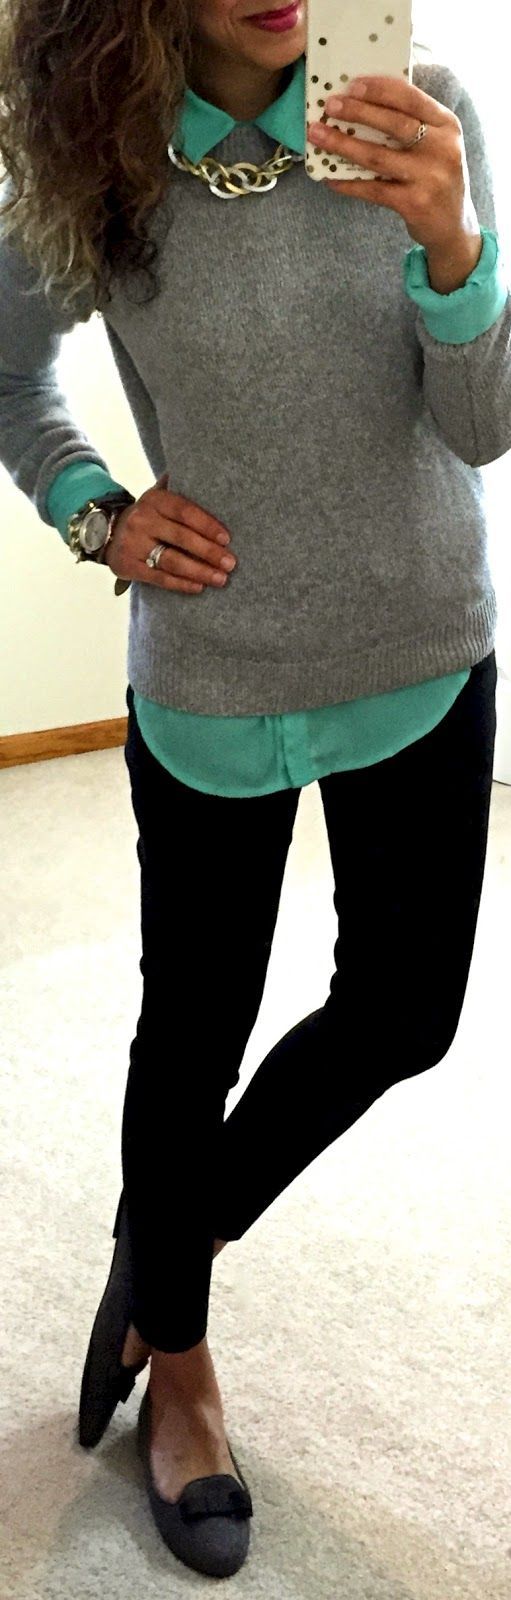 Really like the blouse/sweater/necklace look and cute with black pants for work (but nothing a fan of the mint color)